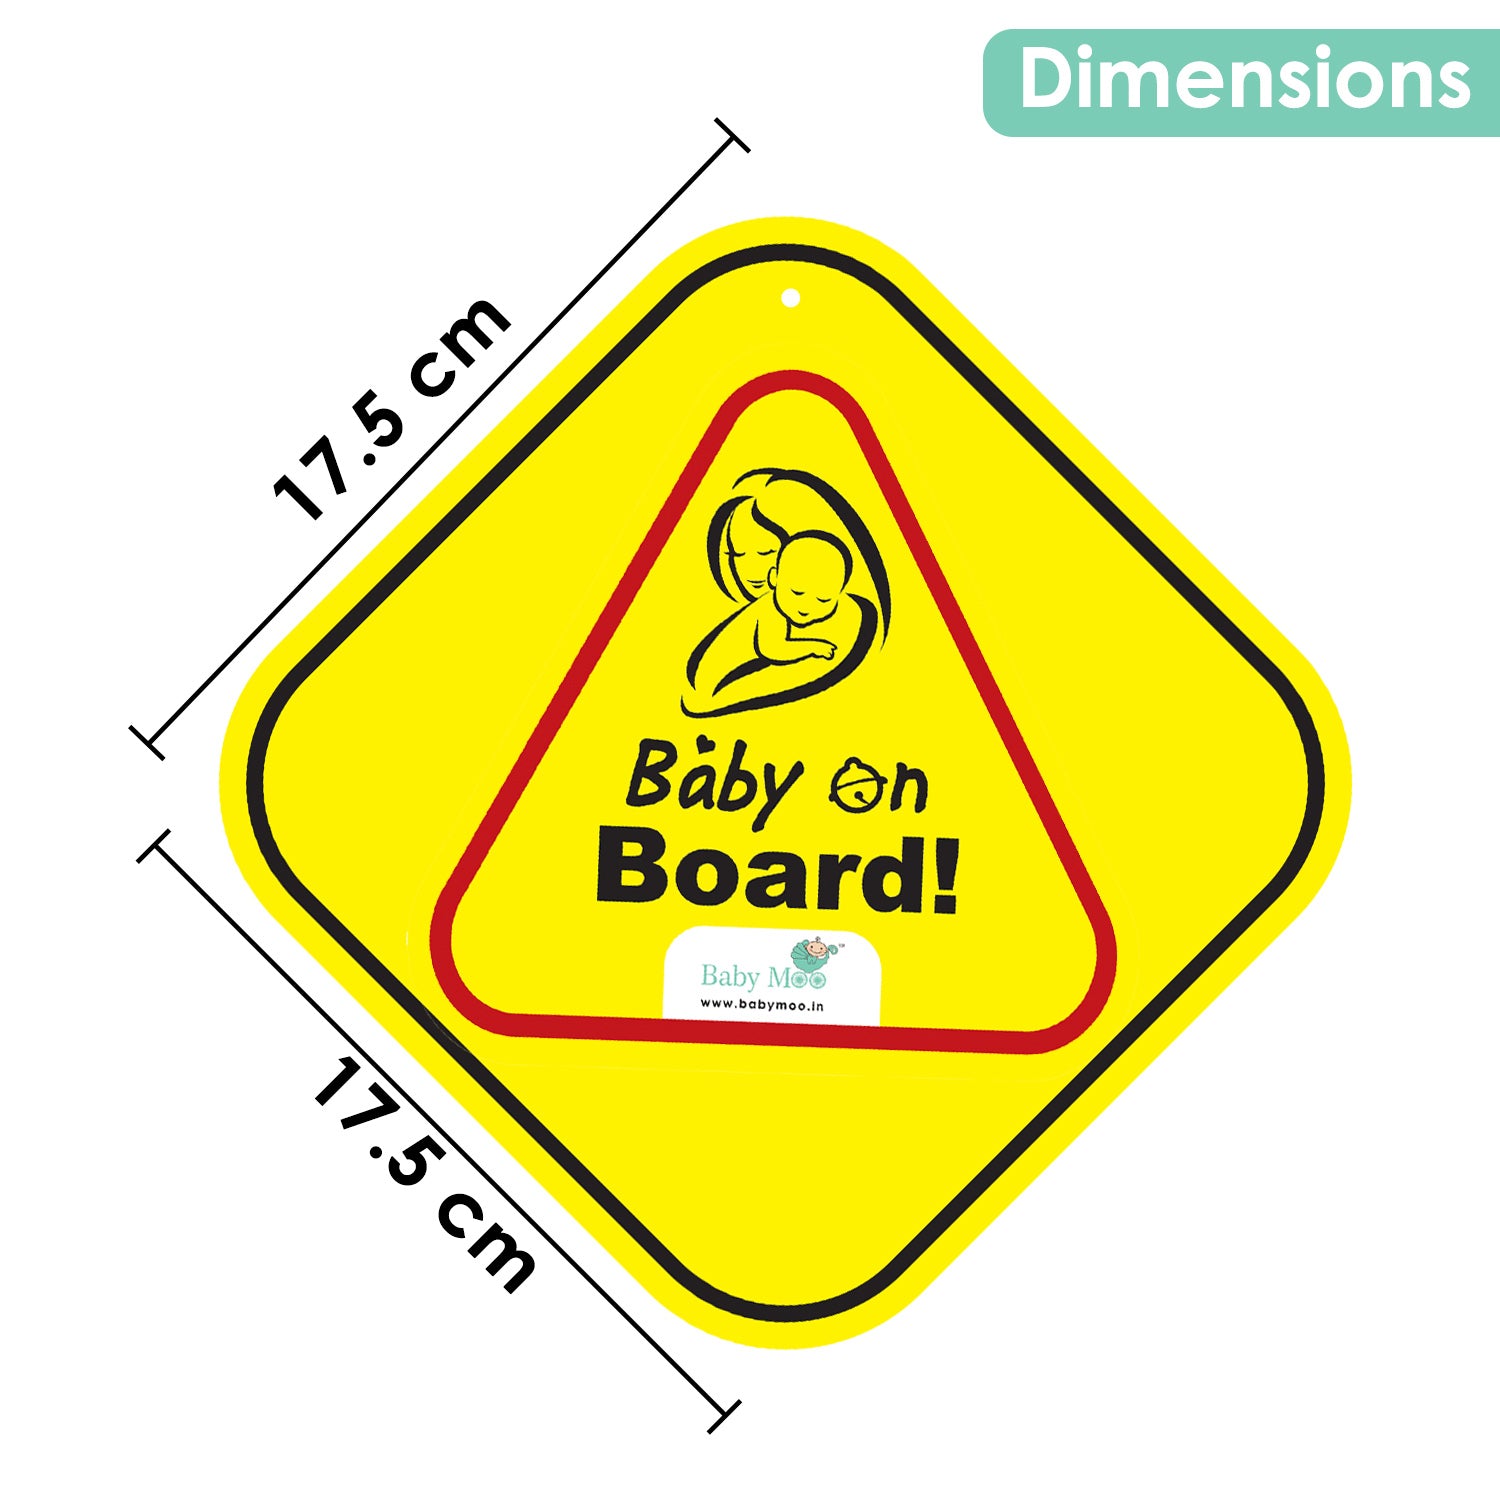 Baby Moo Triangular Baby On Board With Vacuum Suction Cup Clip - Yellow